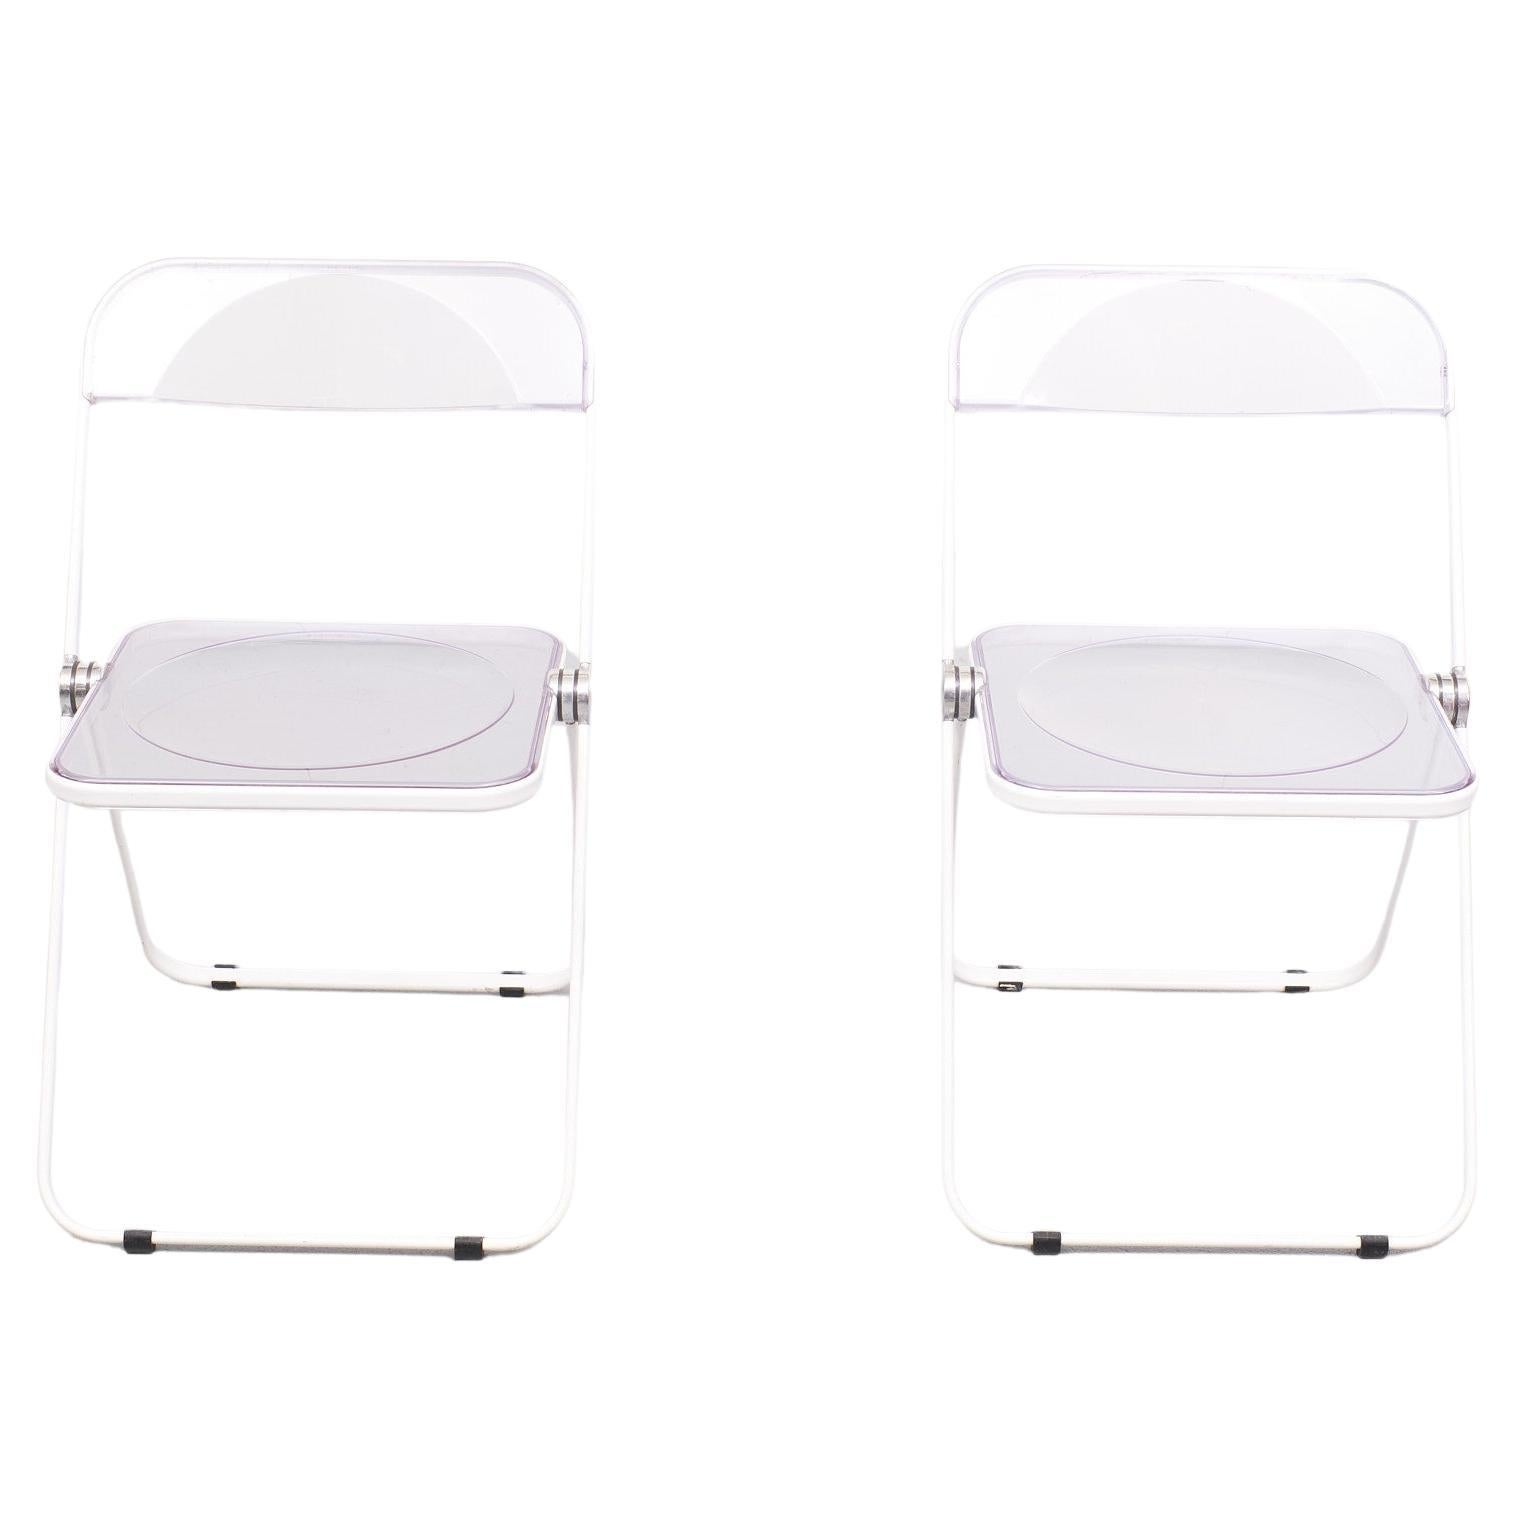 Pair of white and transparent Plia Chairs Giancarlo Piretti for Castelli Italy.
A real classic design. Signed.